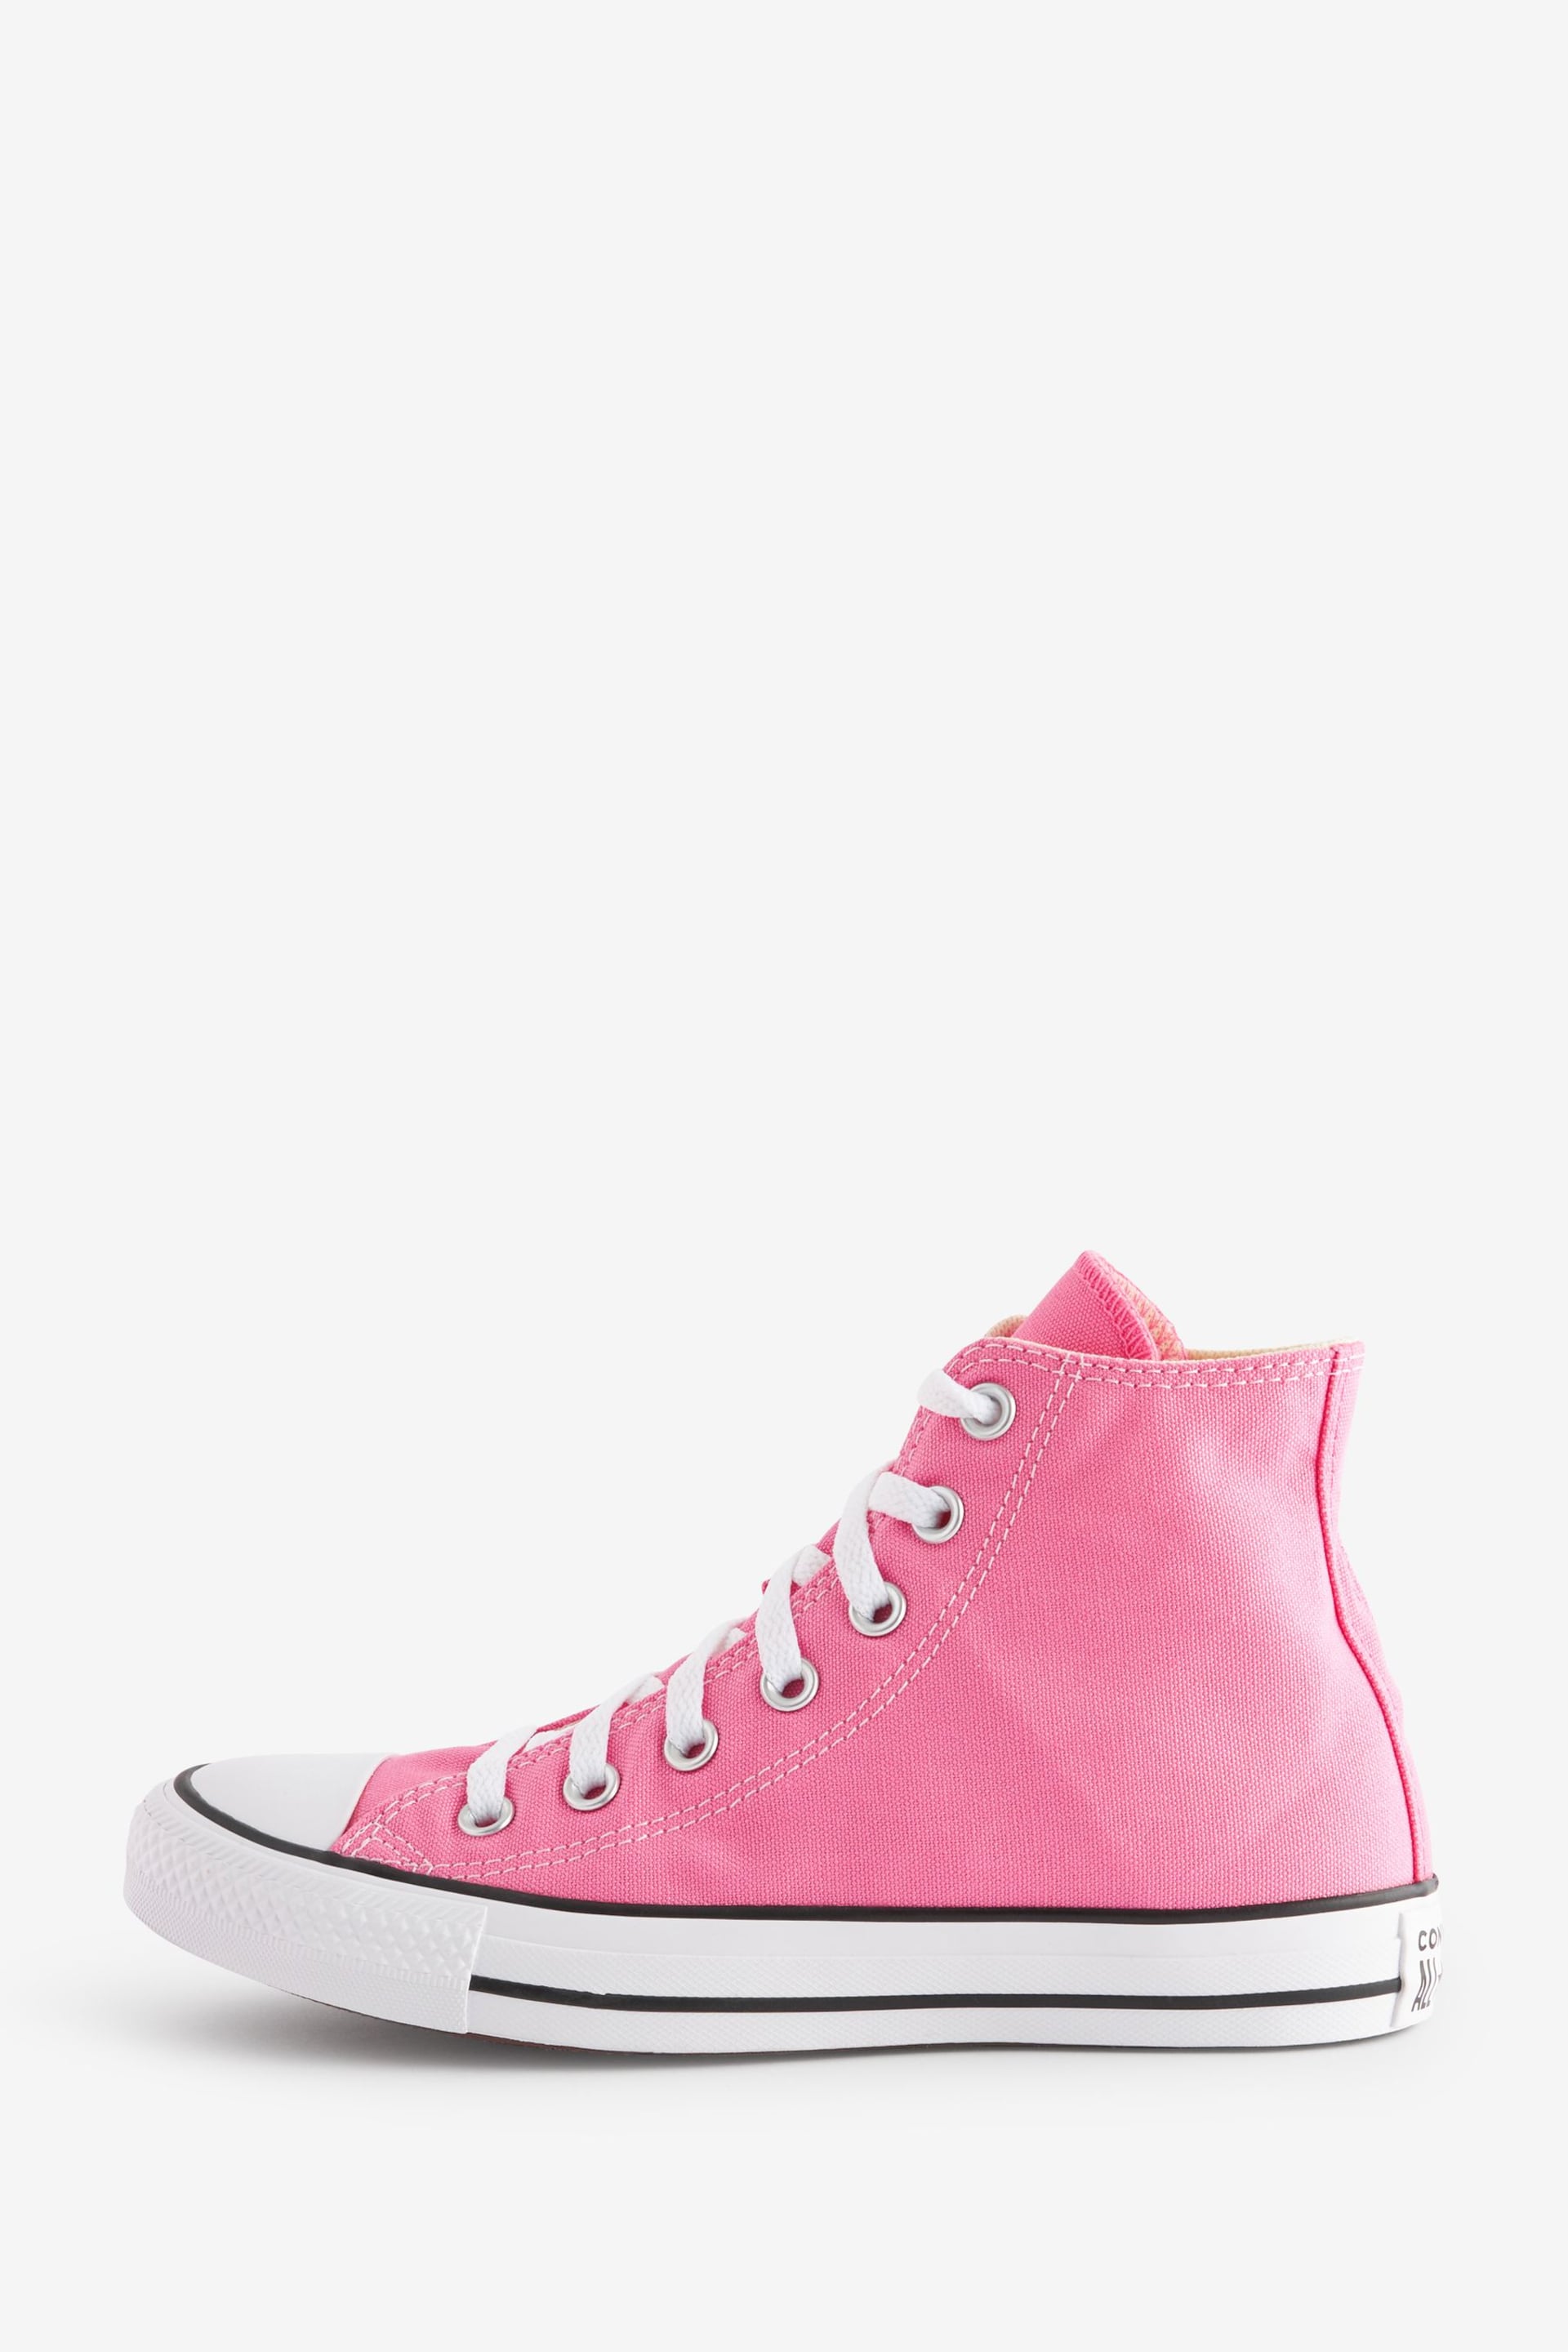 Converse Pink Chuck Taylor All Star Trainers - Image 2 of 6